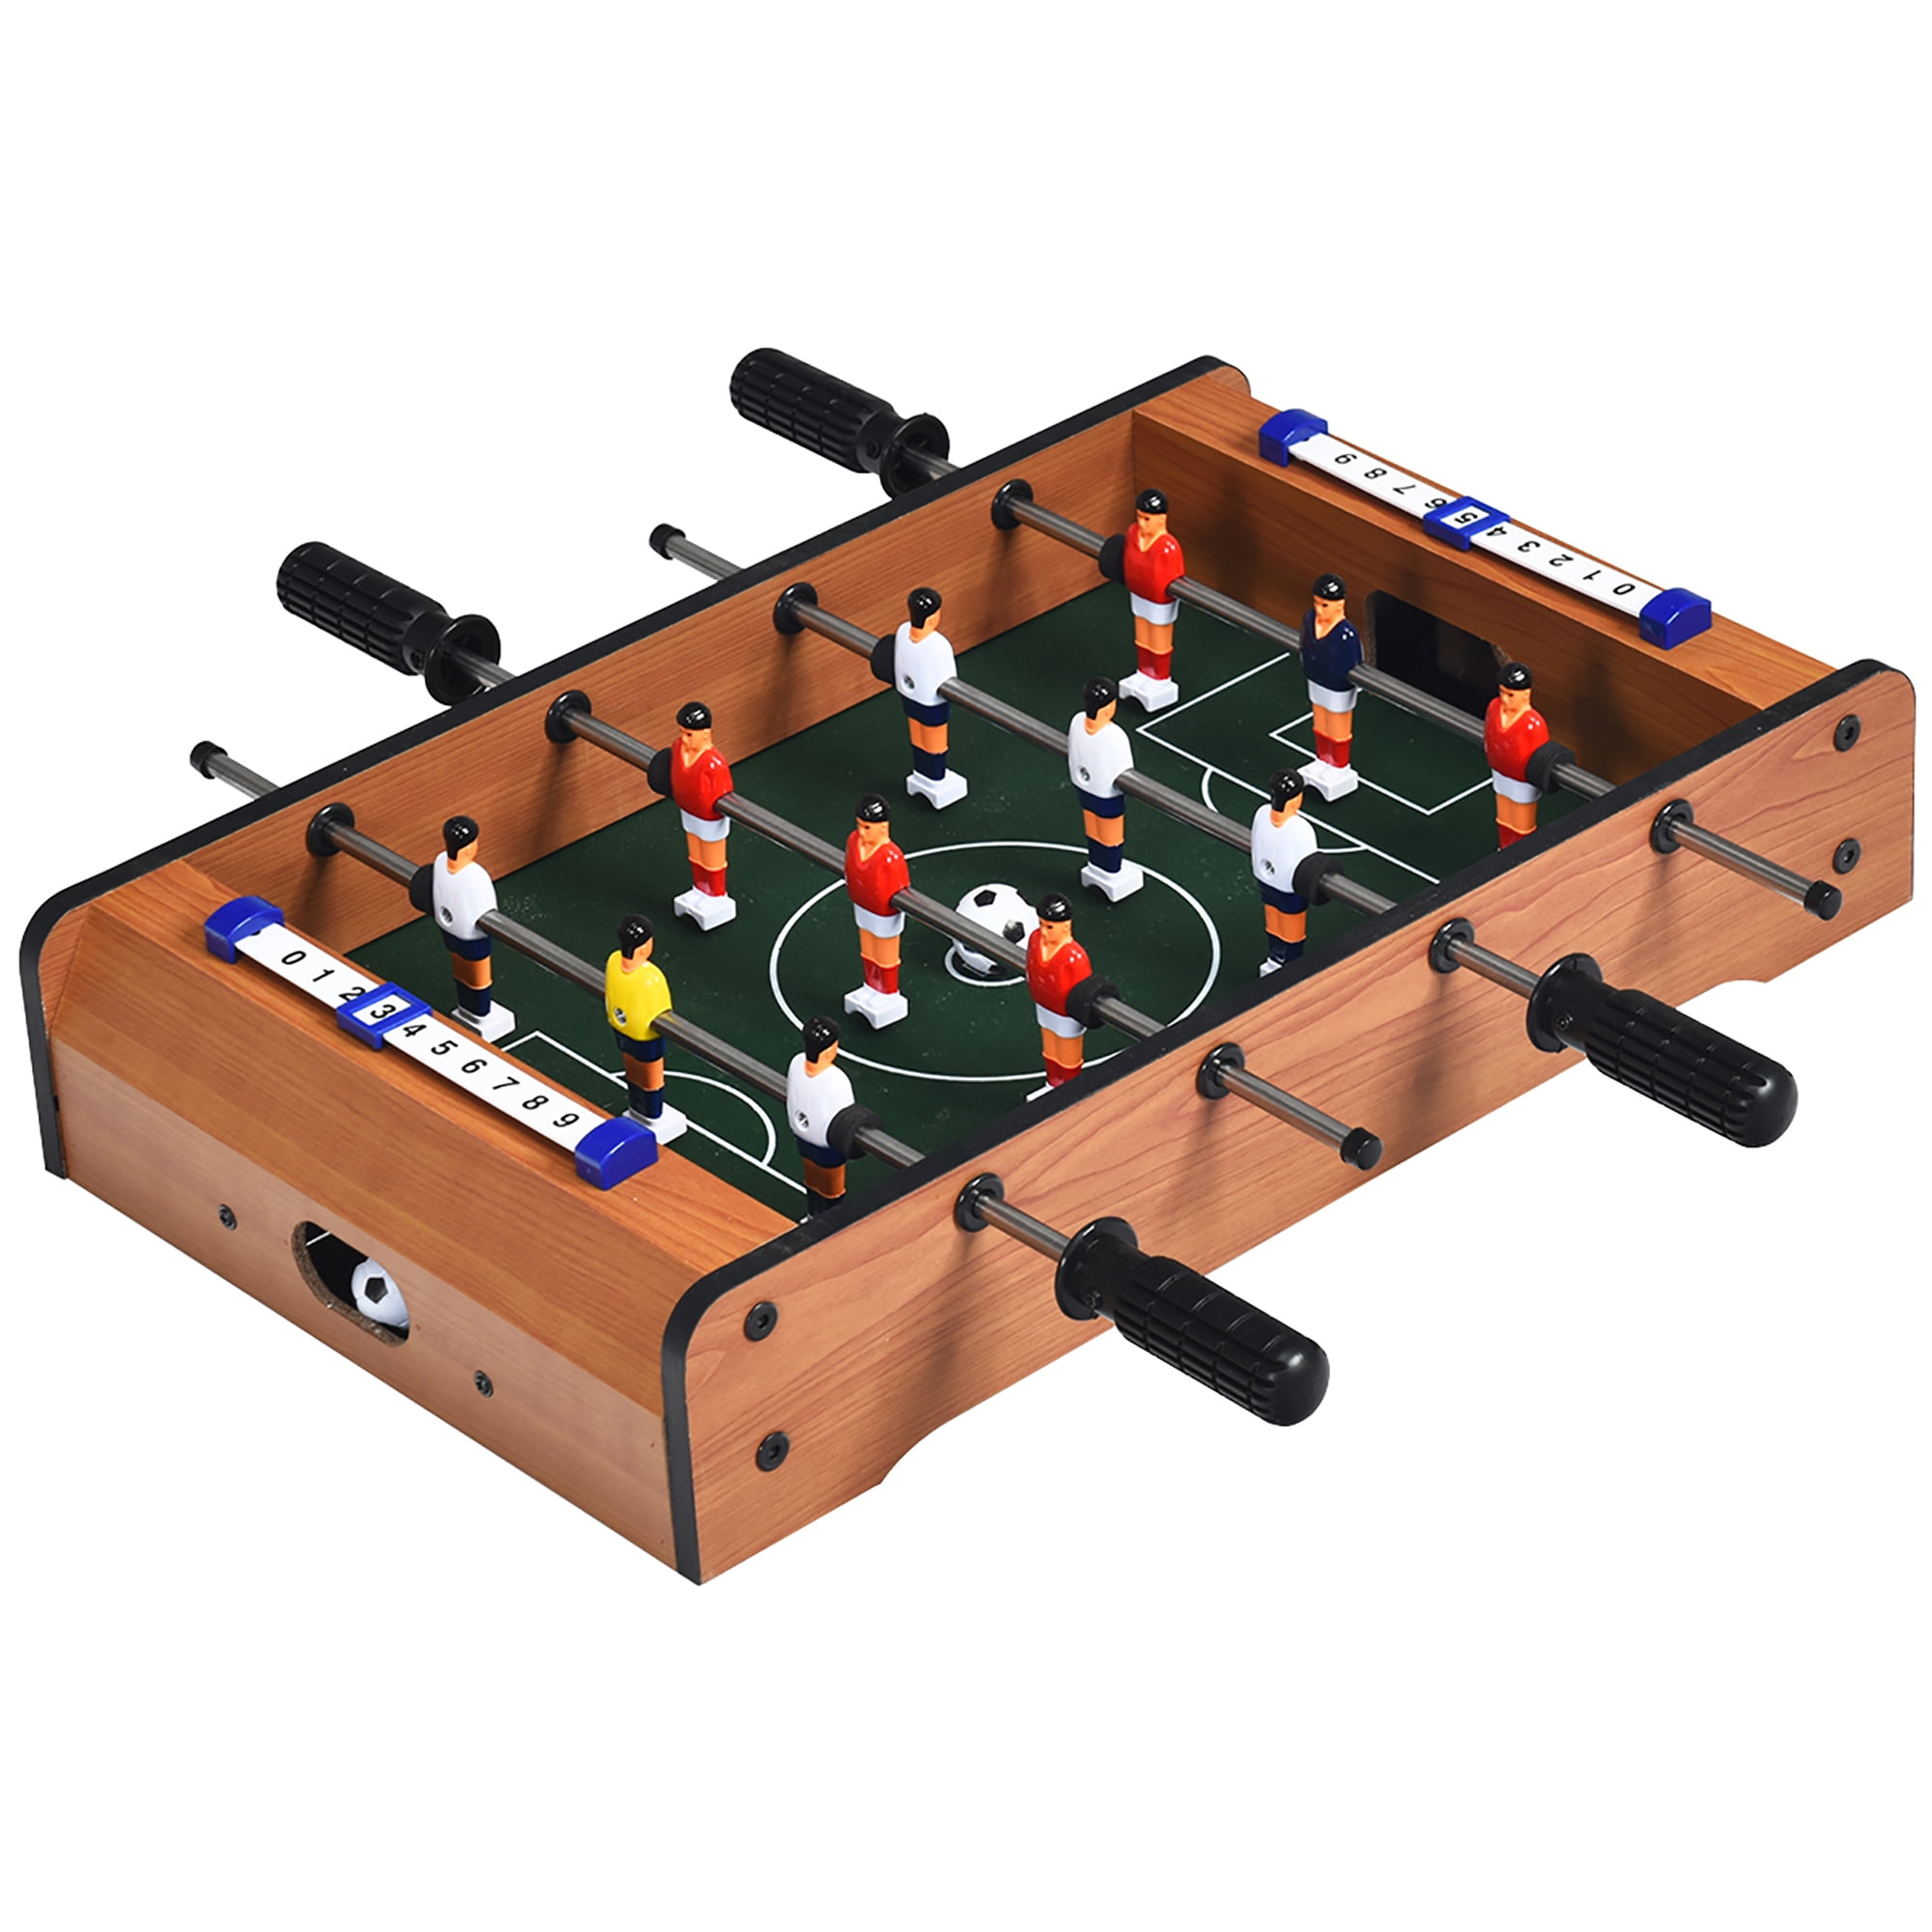 40" Tabletops Foosball Table Soccer Football Sports Competition Game  Indoor 